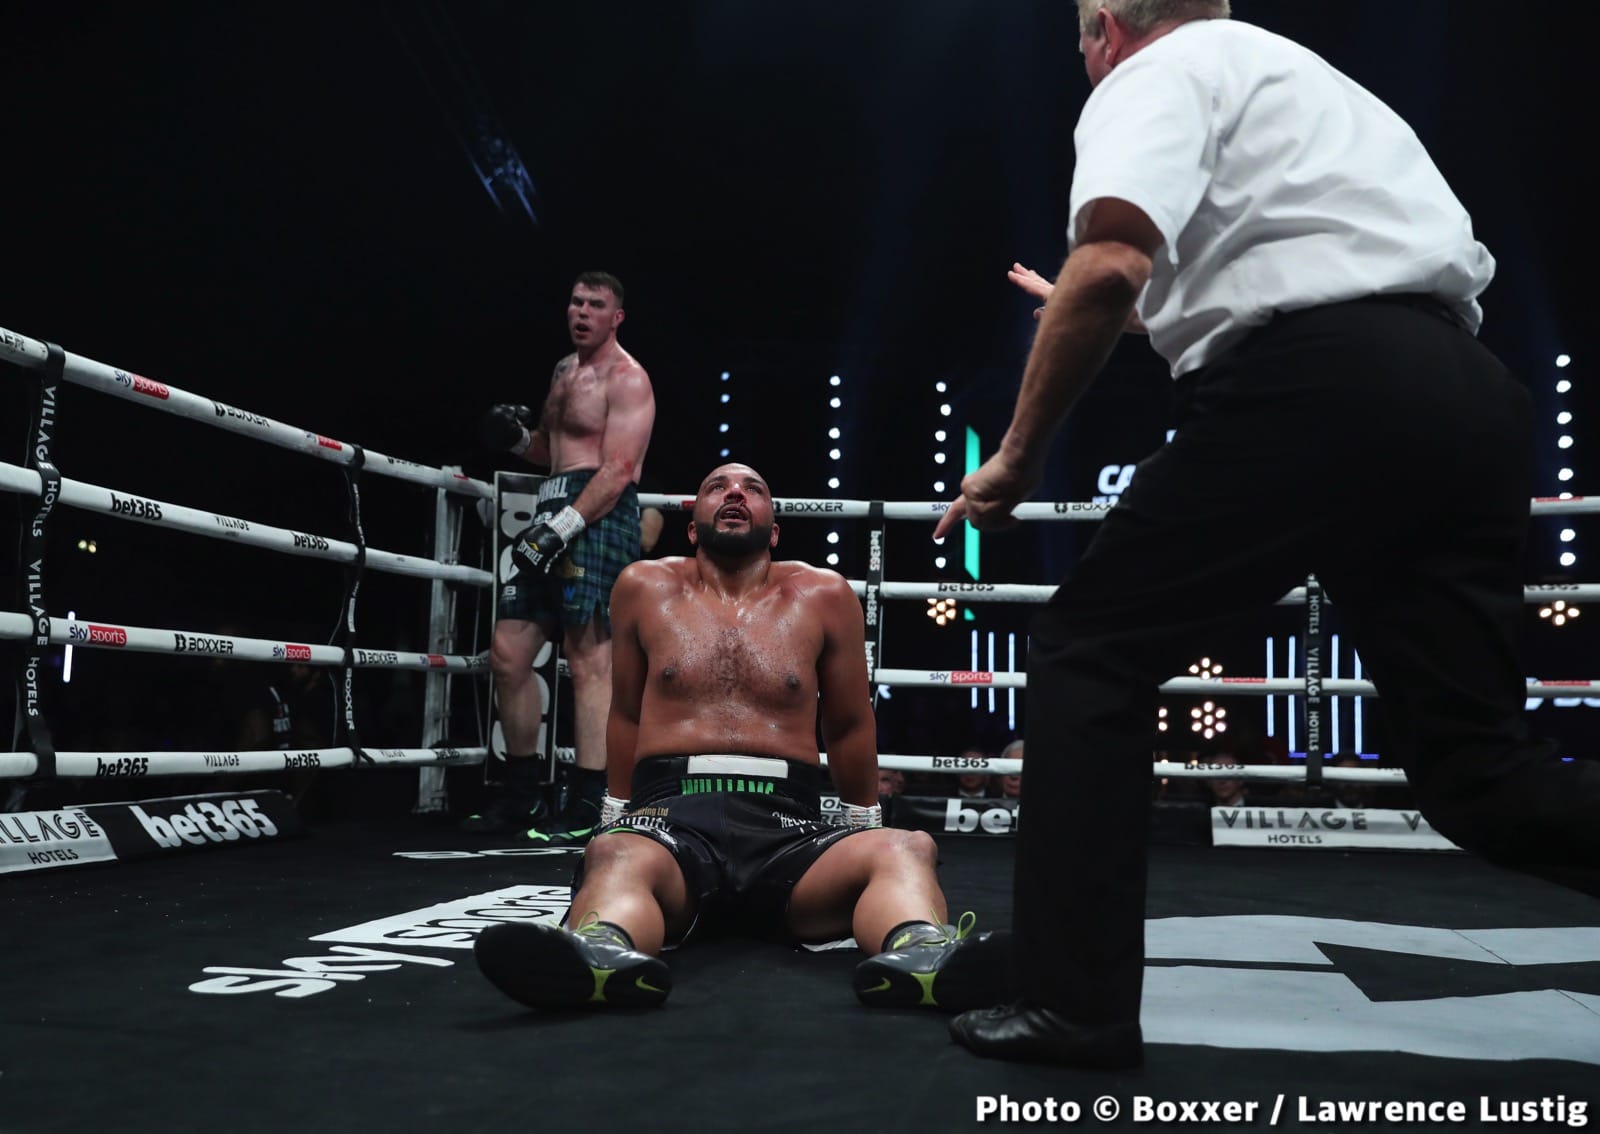 Results from BOXXER & Sky Sports Boxing Fight Night London